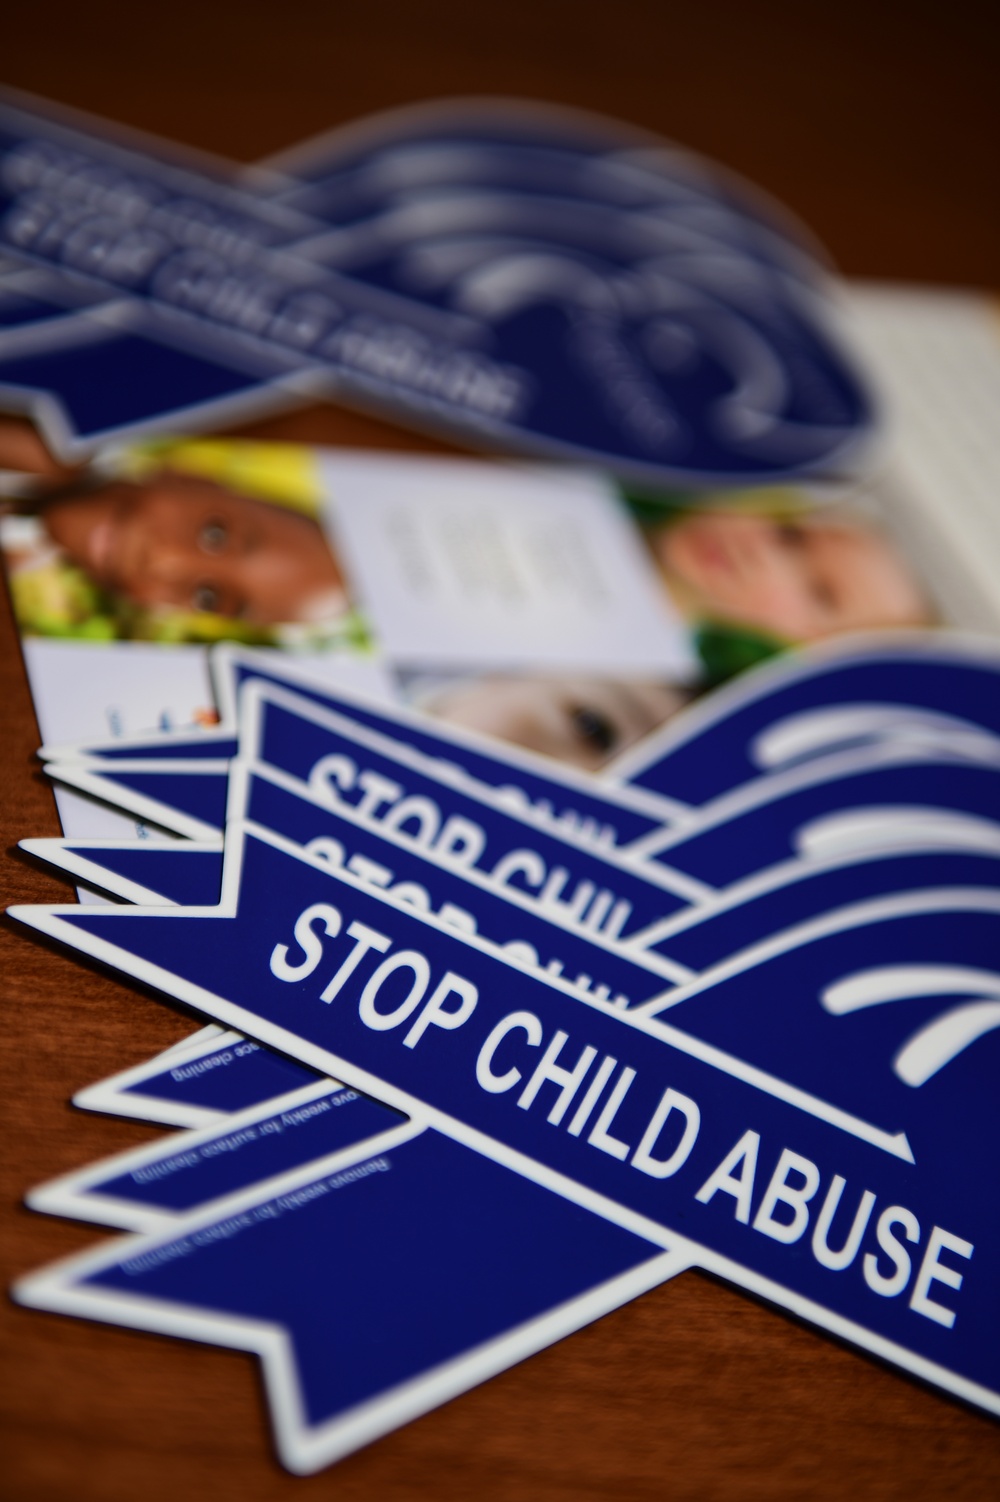 Child Abuse Awareness Month: recognizing the need to act